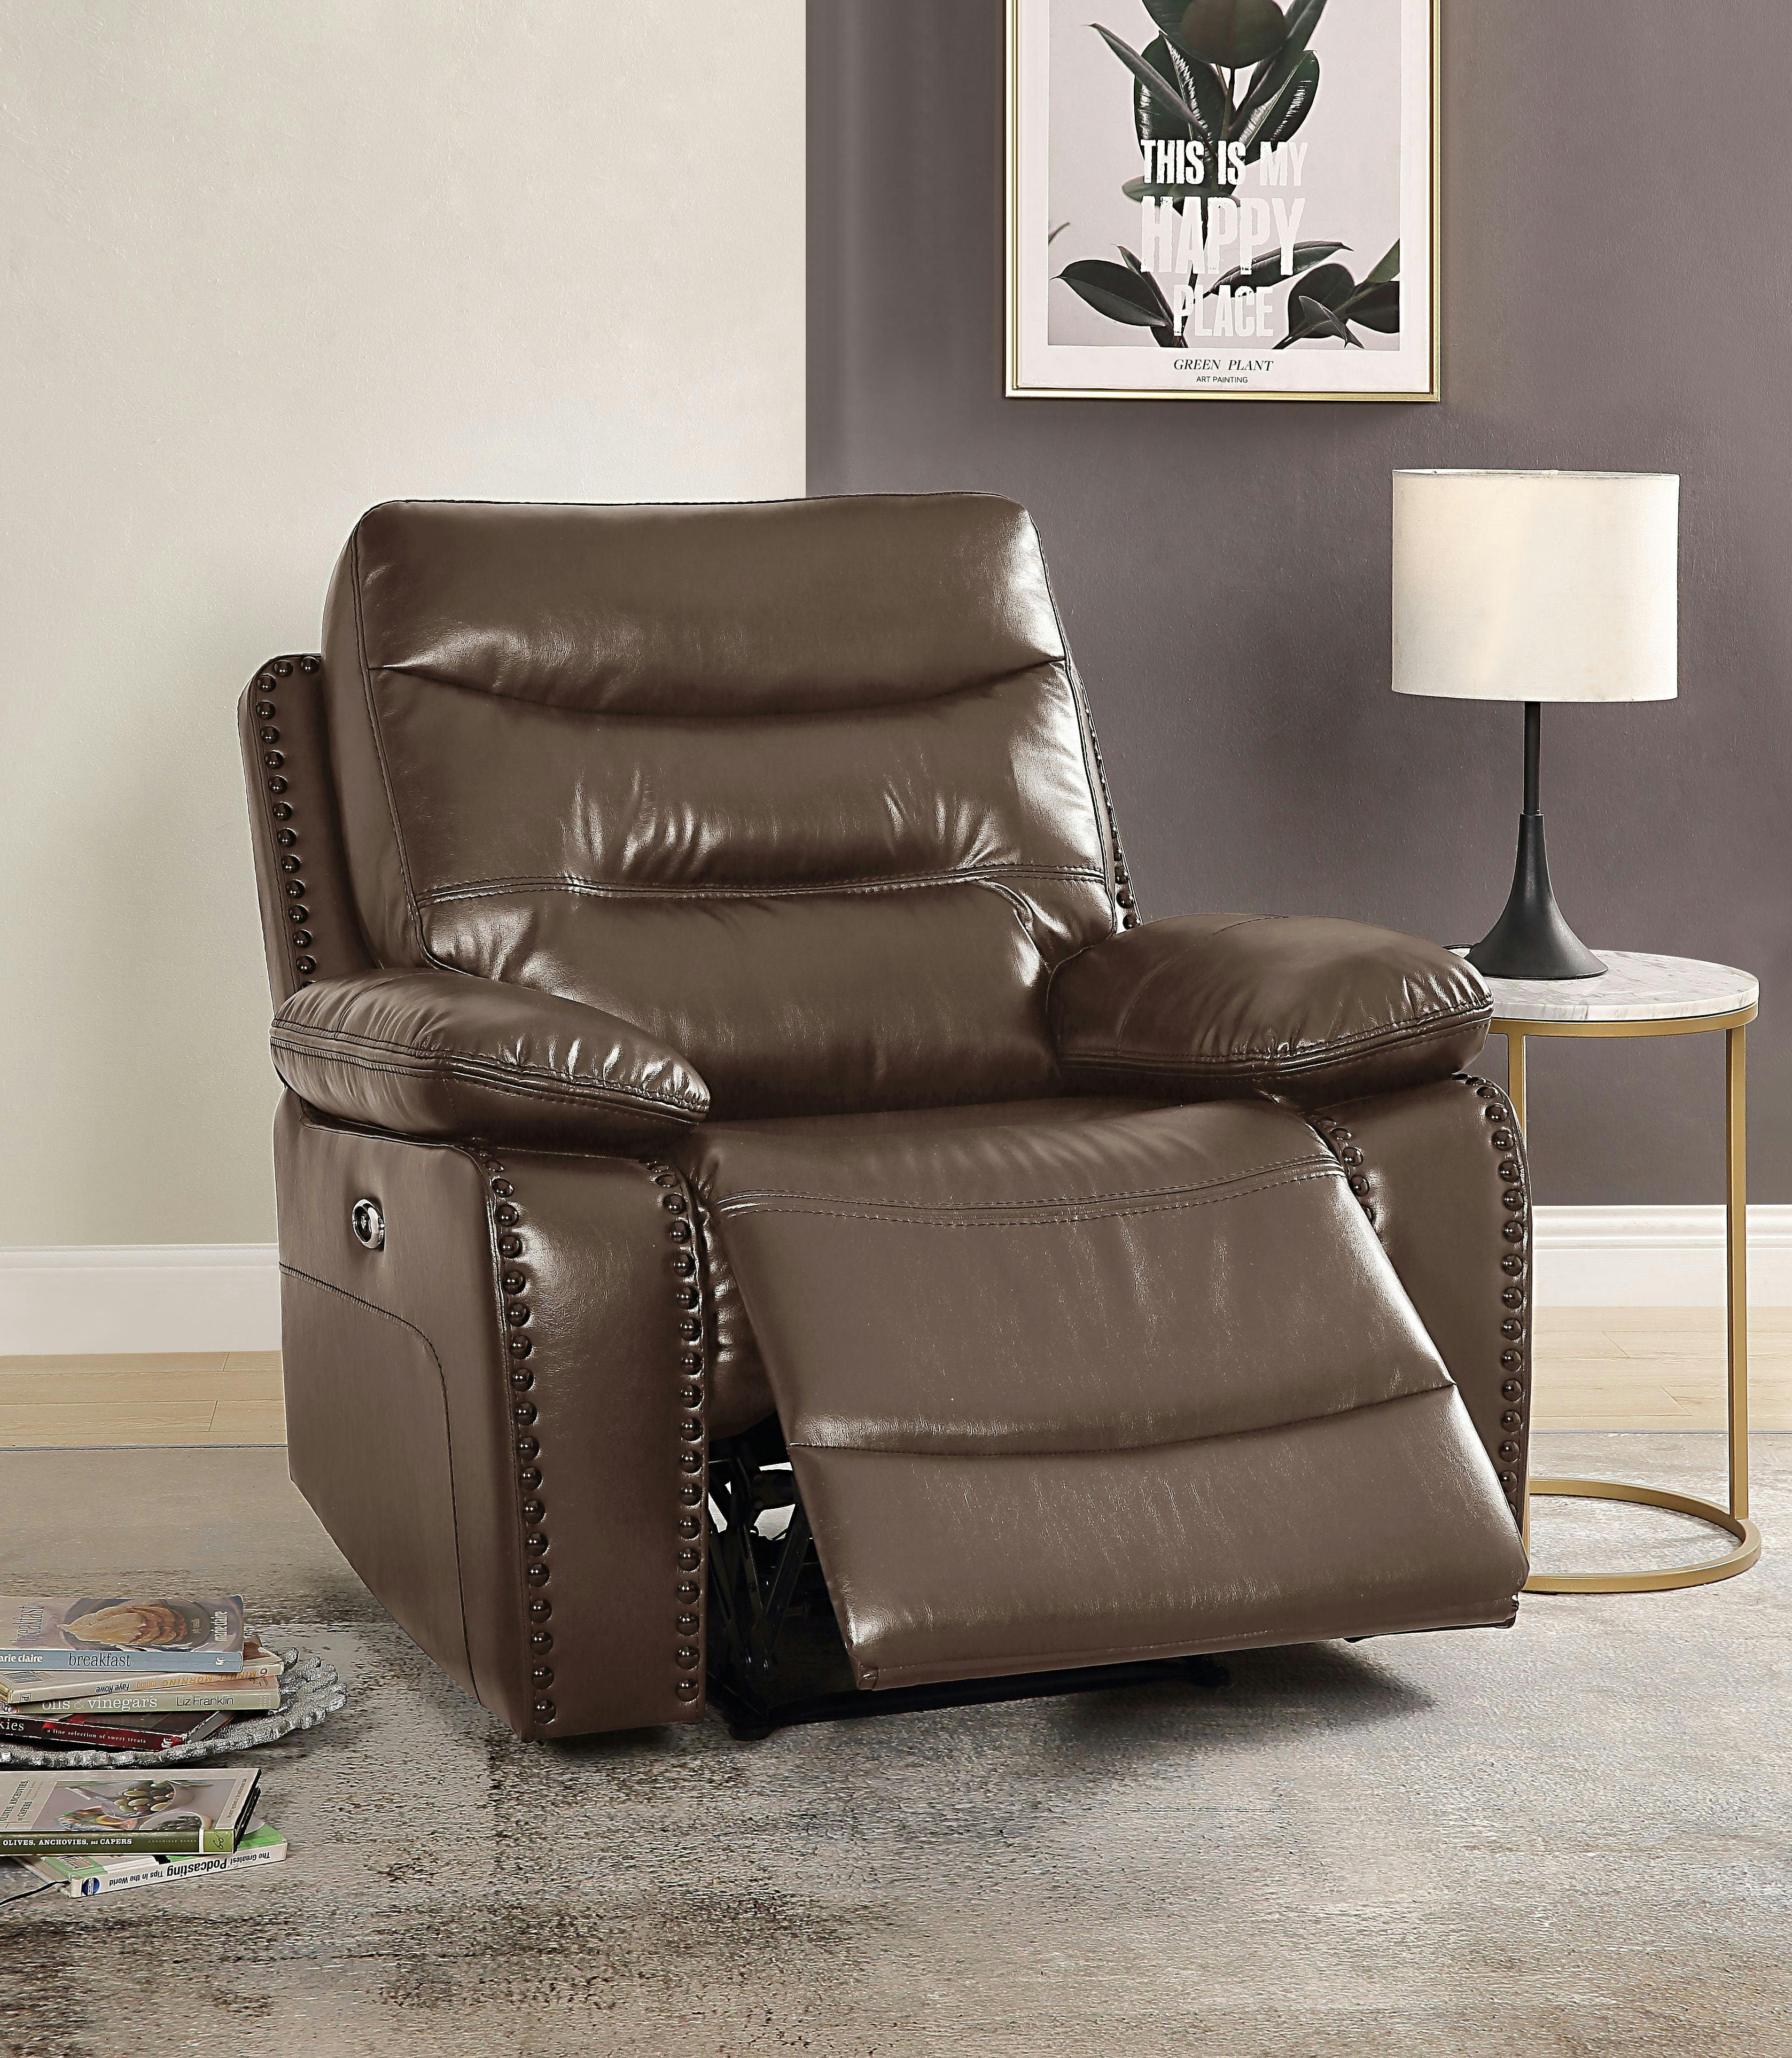 Horizon Brown Leather Recliner with Wood Accents